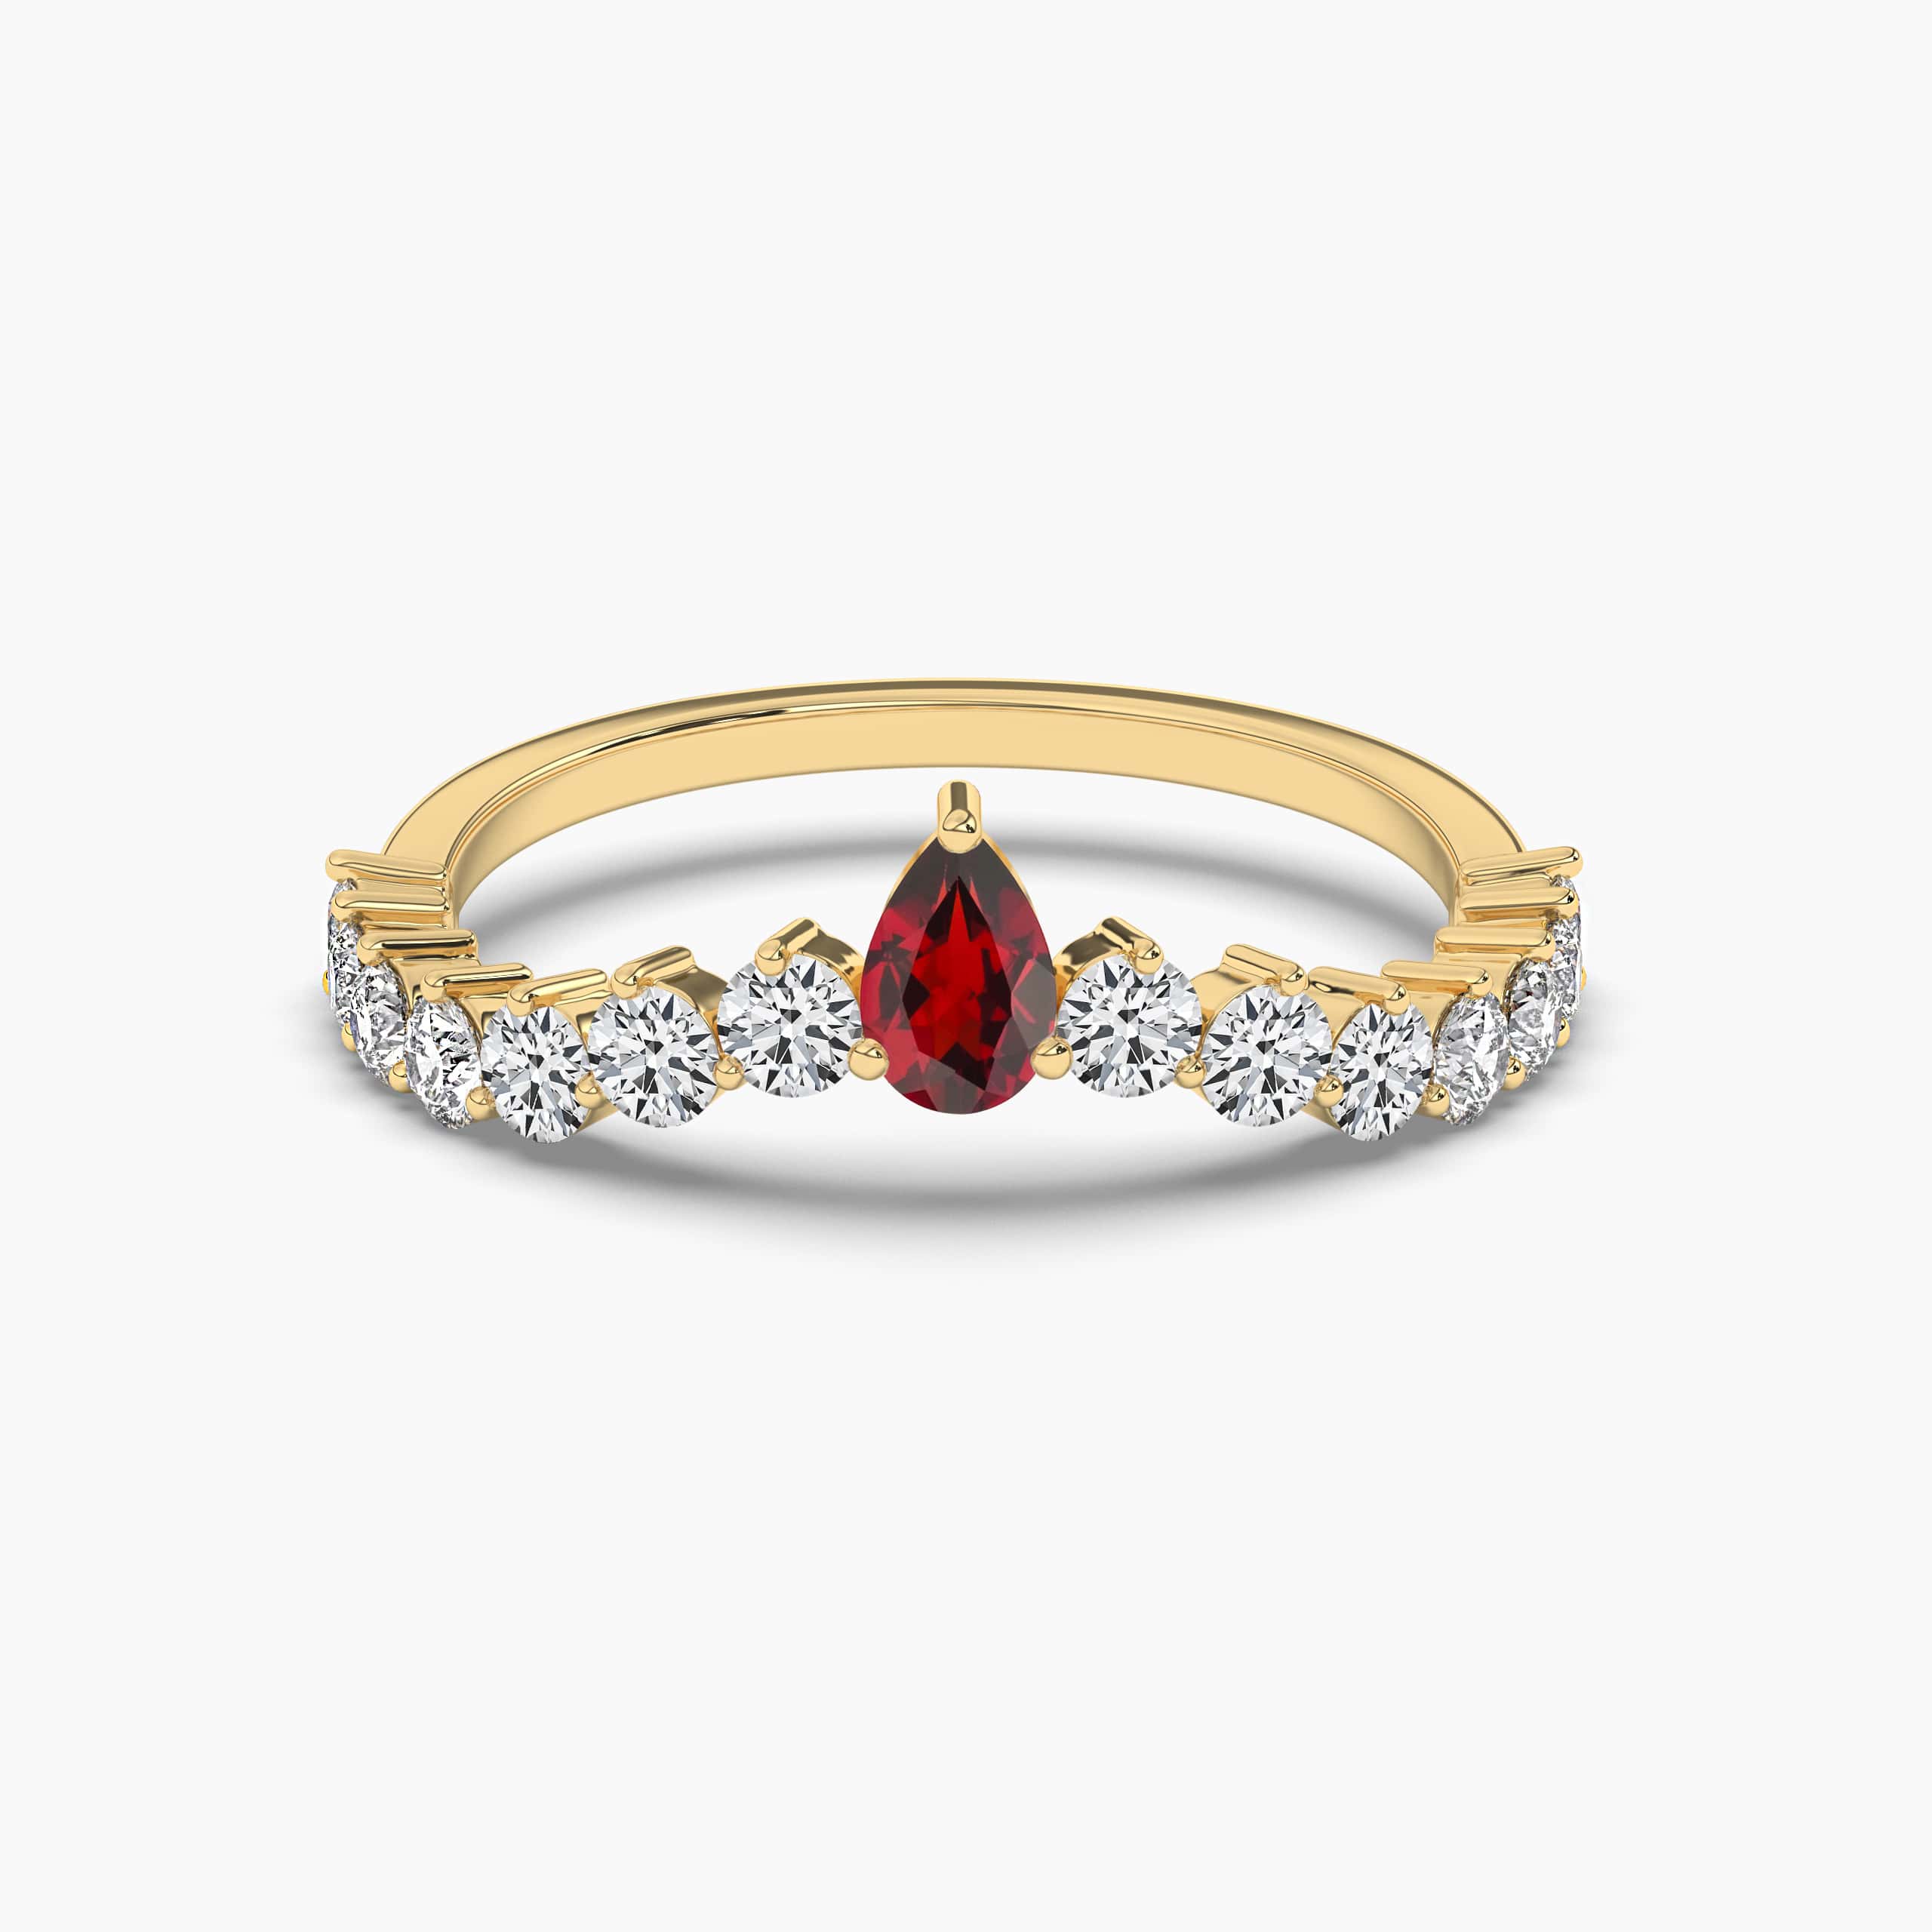 PEAR-SHAPED GARNET ENGAGEMENT RING WITH DIAMOND